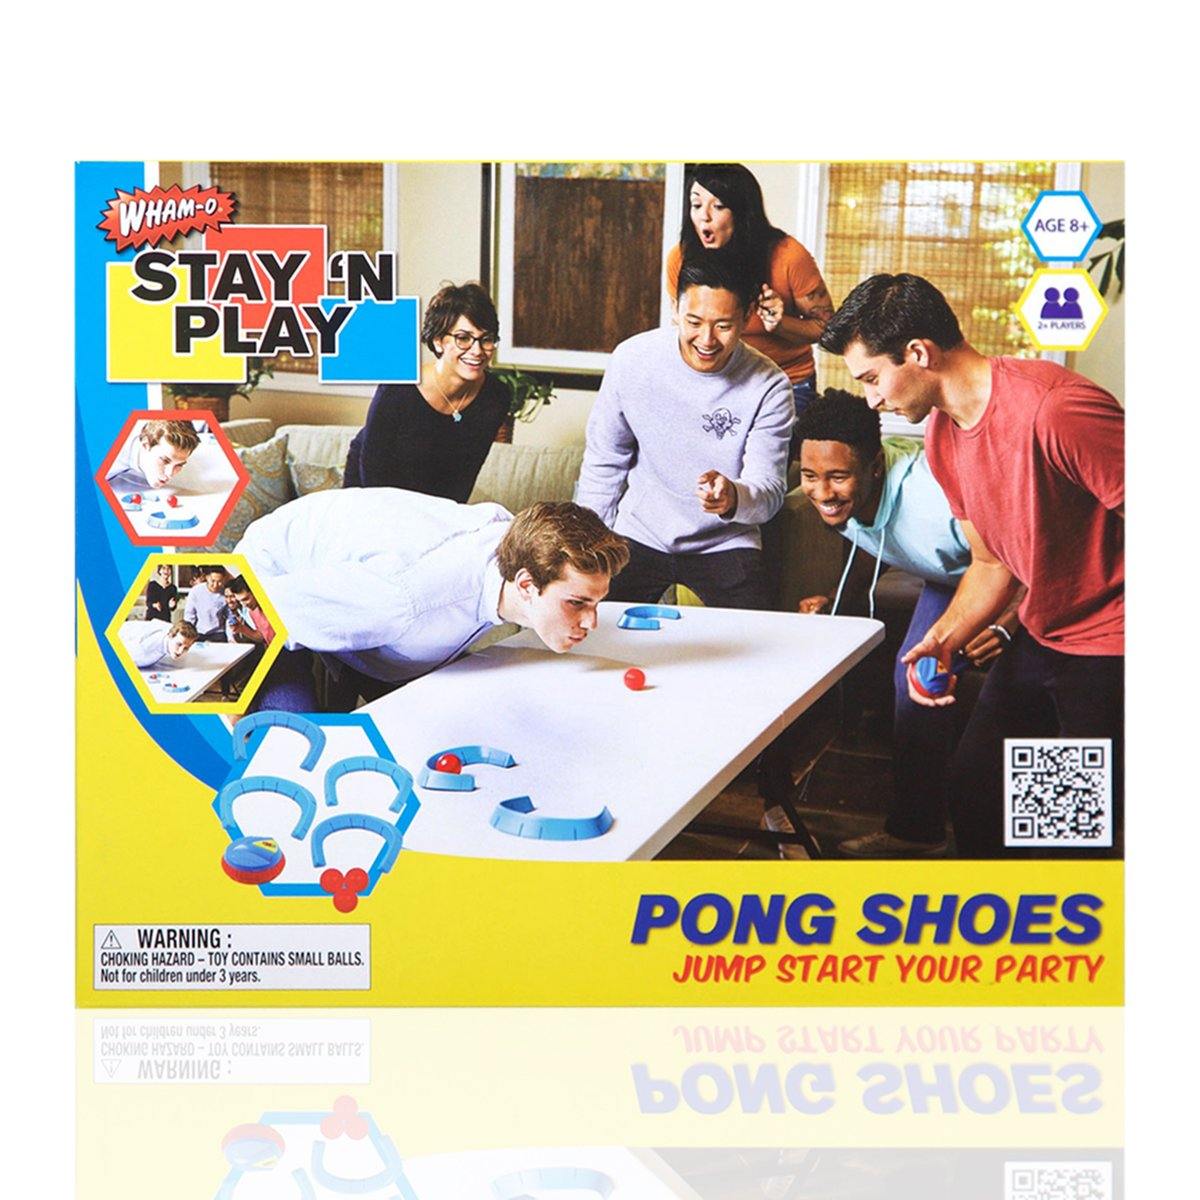 Product Package Wham-O Pong Shoes - Stay 'N Play on sale